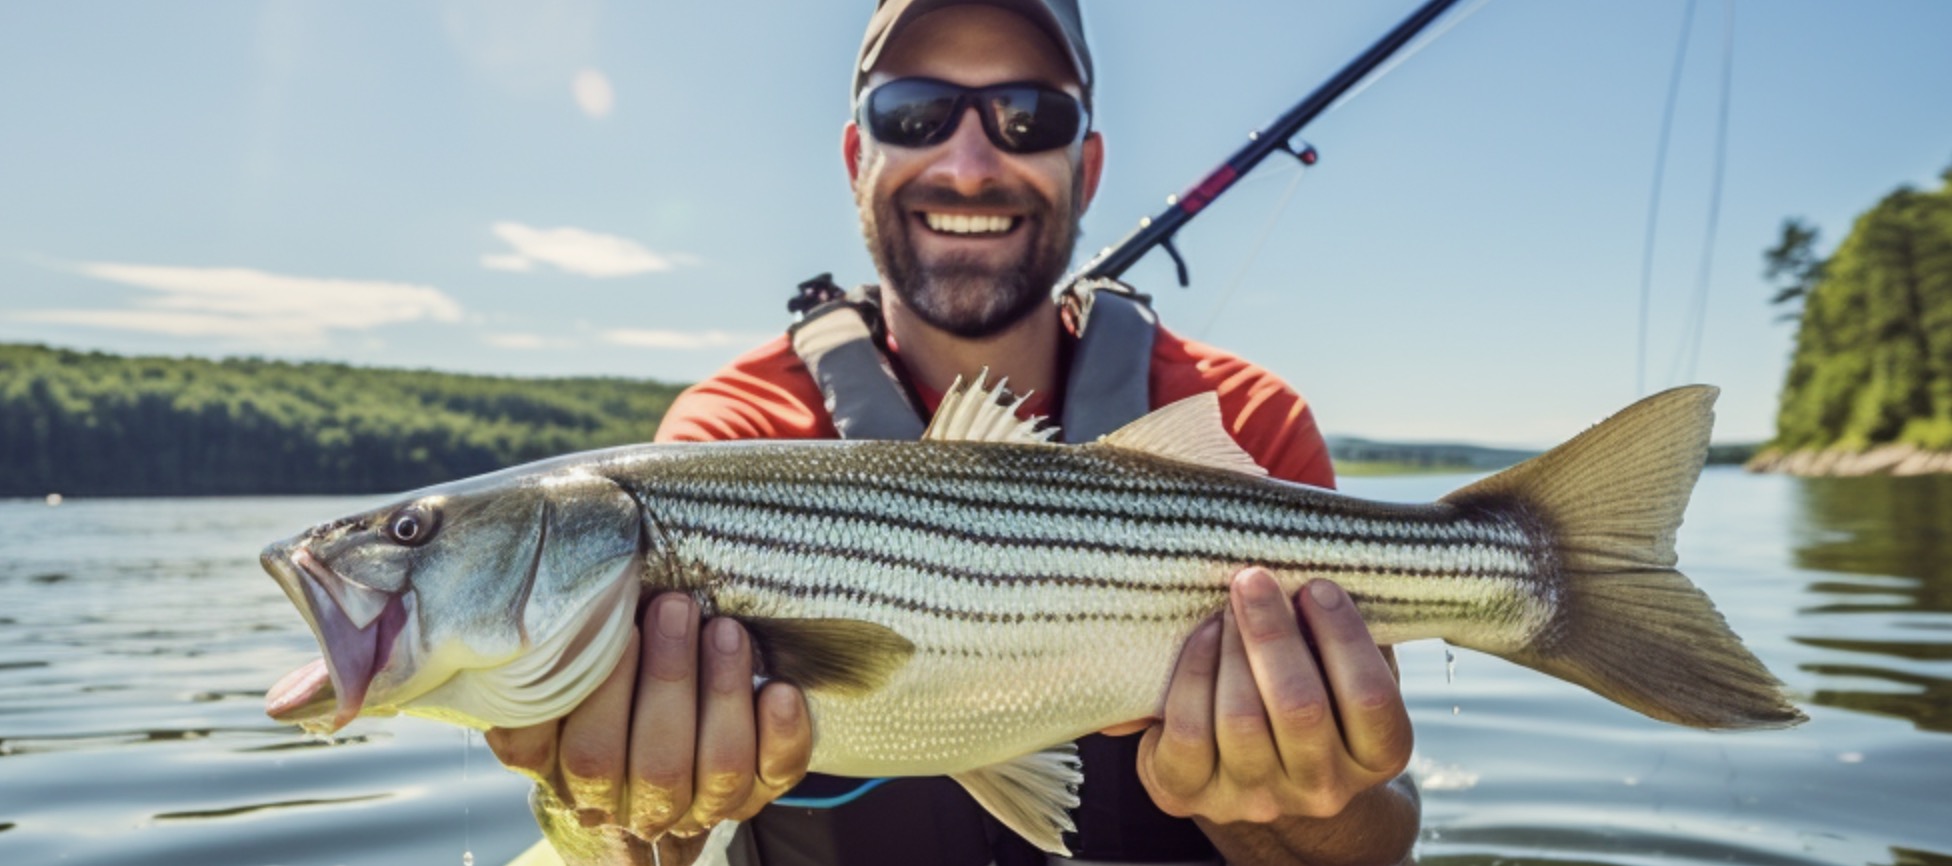 Fish Finder Rig Striped Bass: Master the Art of Catching Strippers!